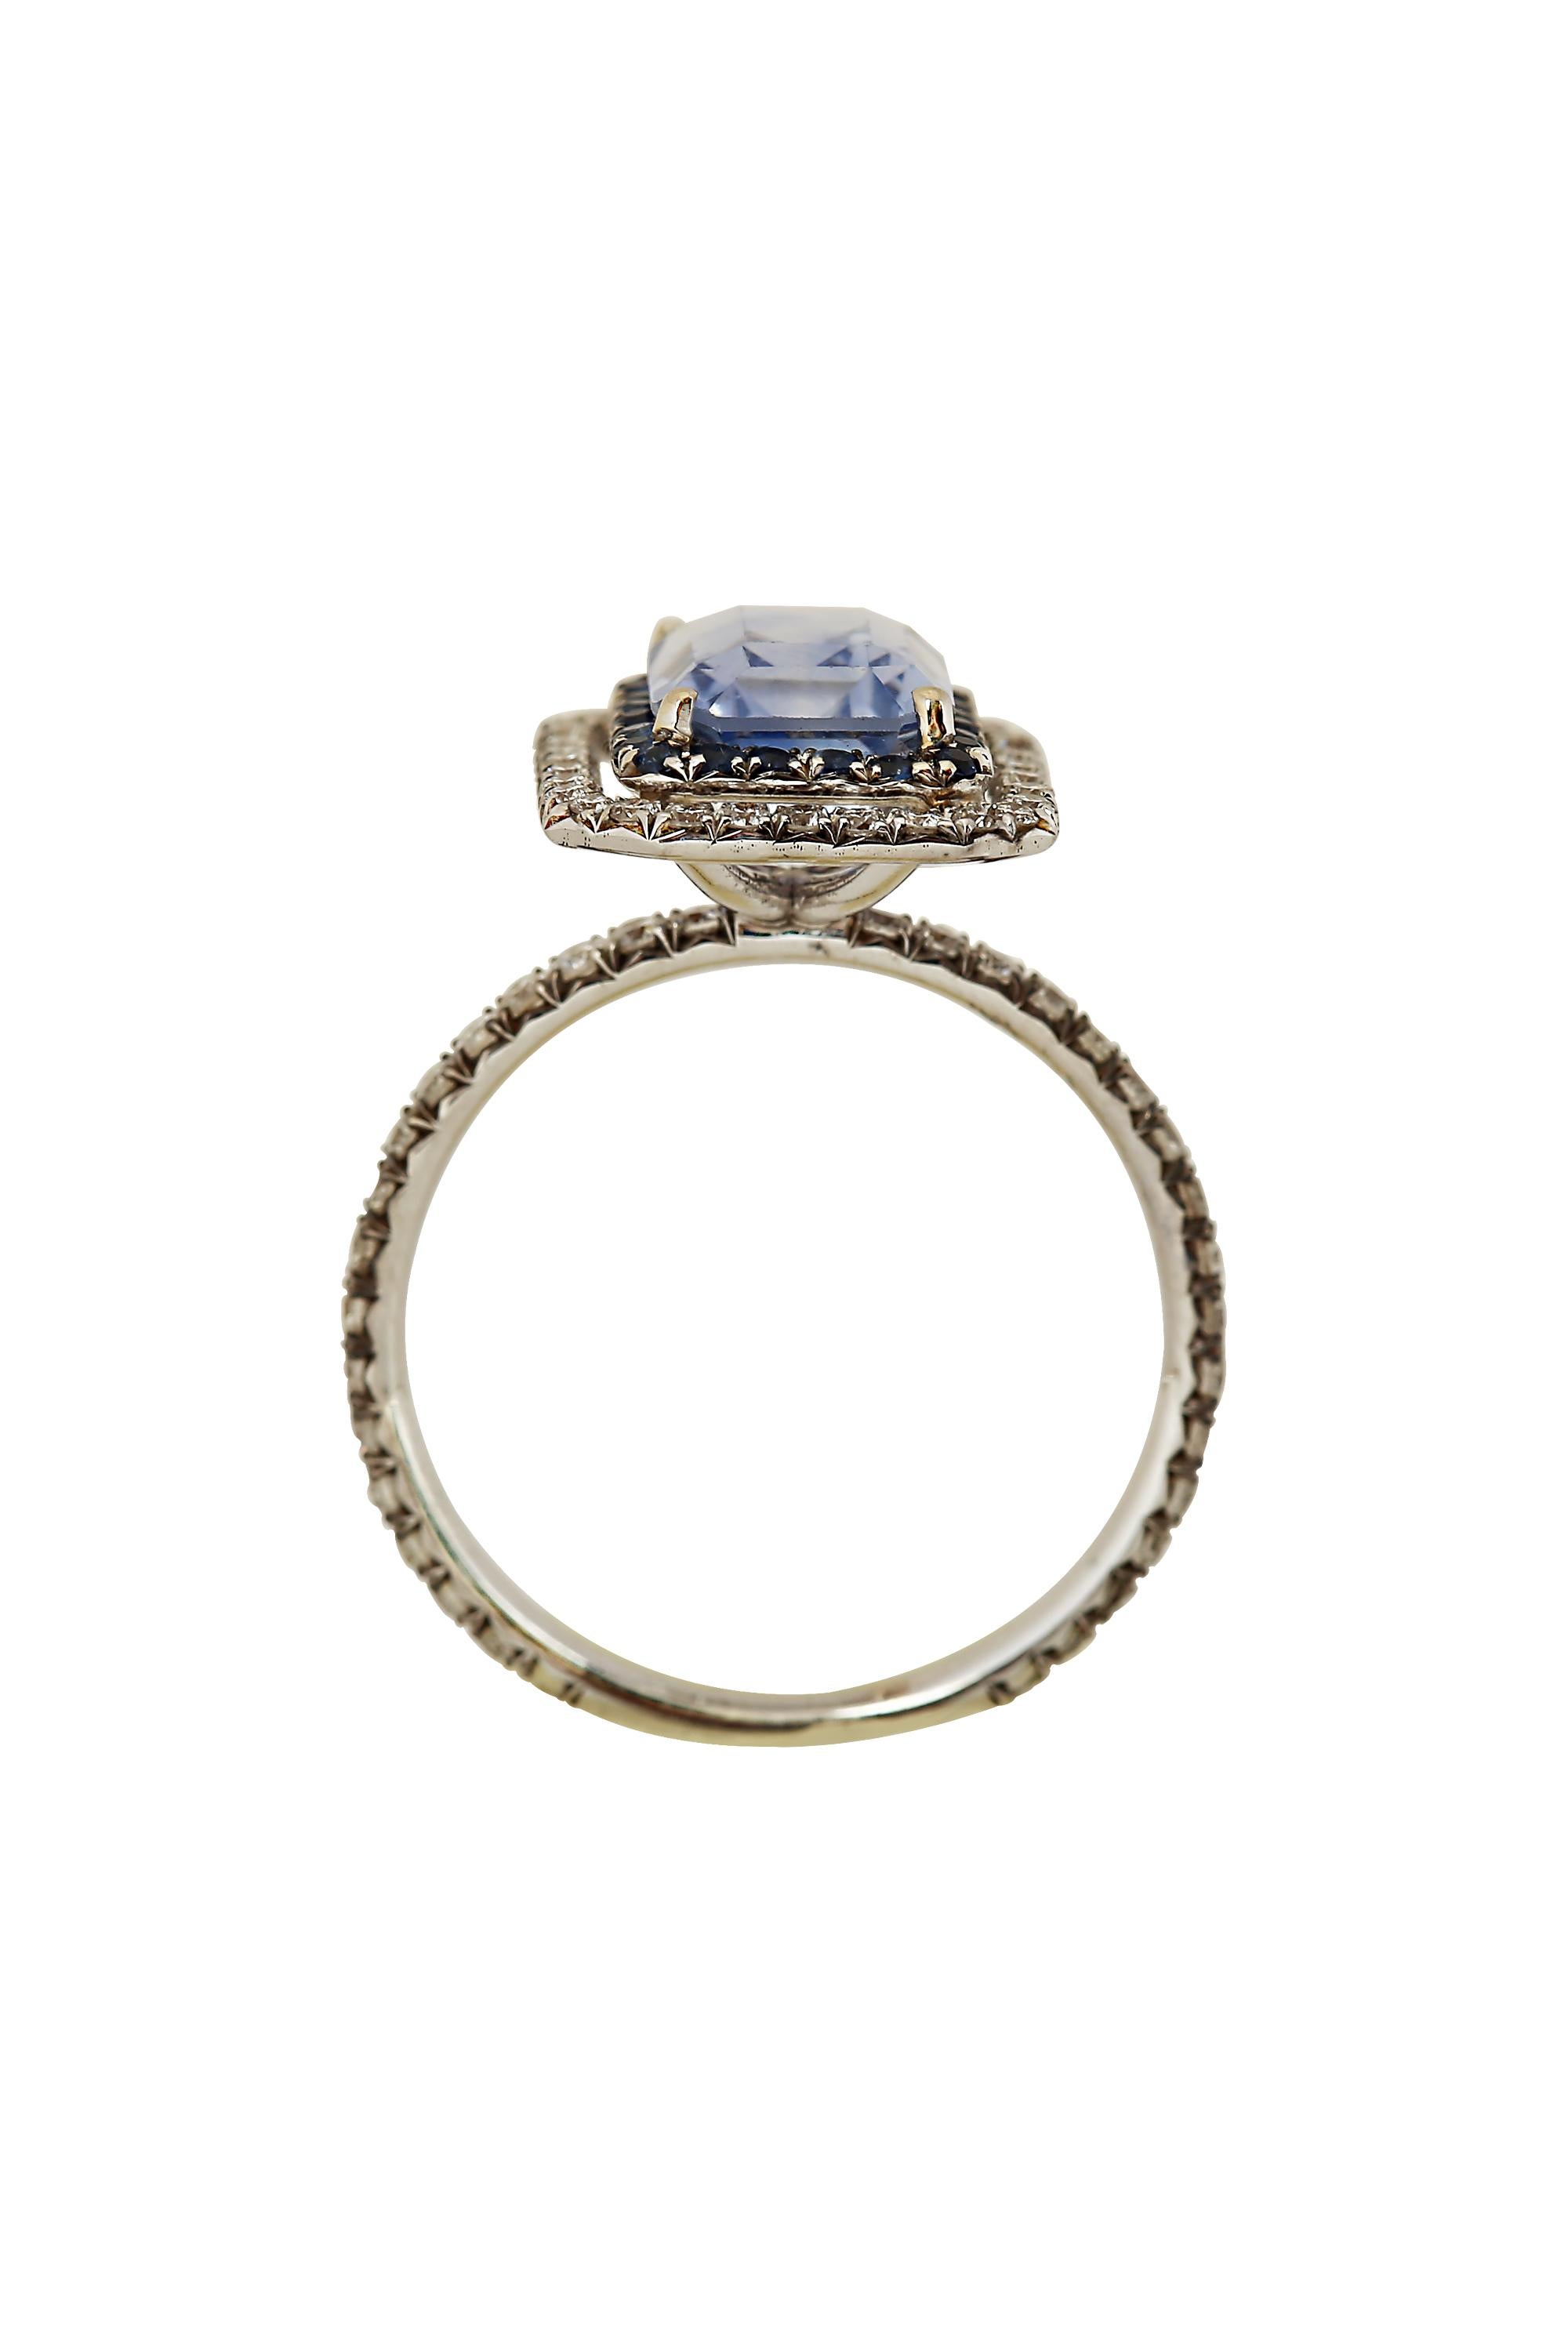 Designed and created by Gems Are Forever, Inc. Beverly Hills, this limpid light blue rectangular sapphire, weighing 2.71 carats, is smartly set off by a double framing of lively blue sapphires and diamonds creating a polished and classic ring.